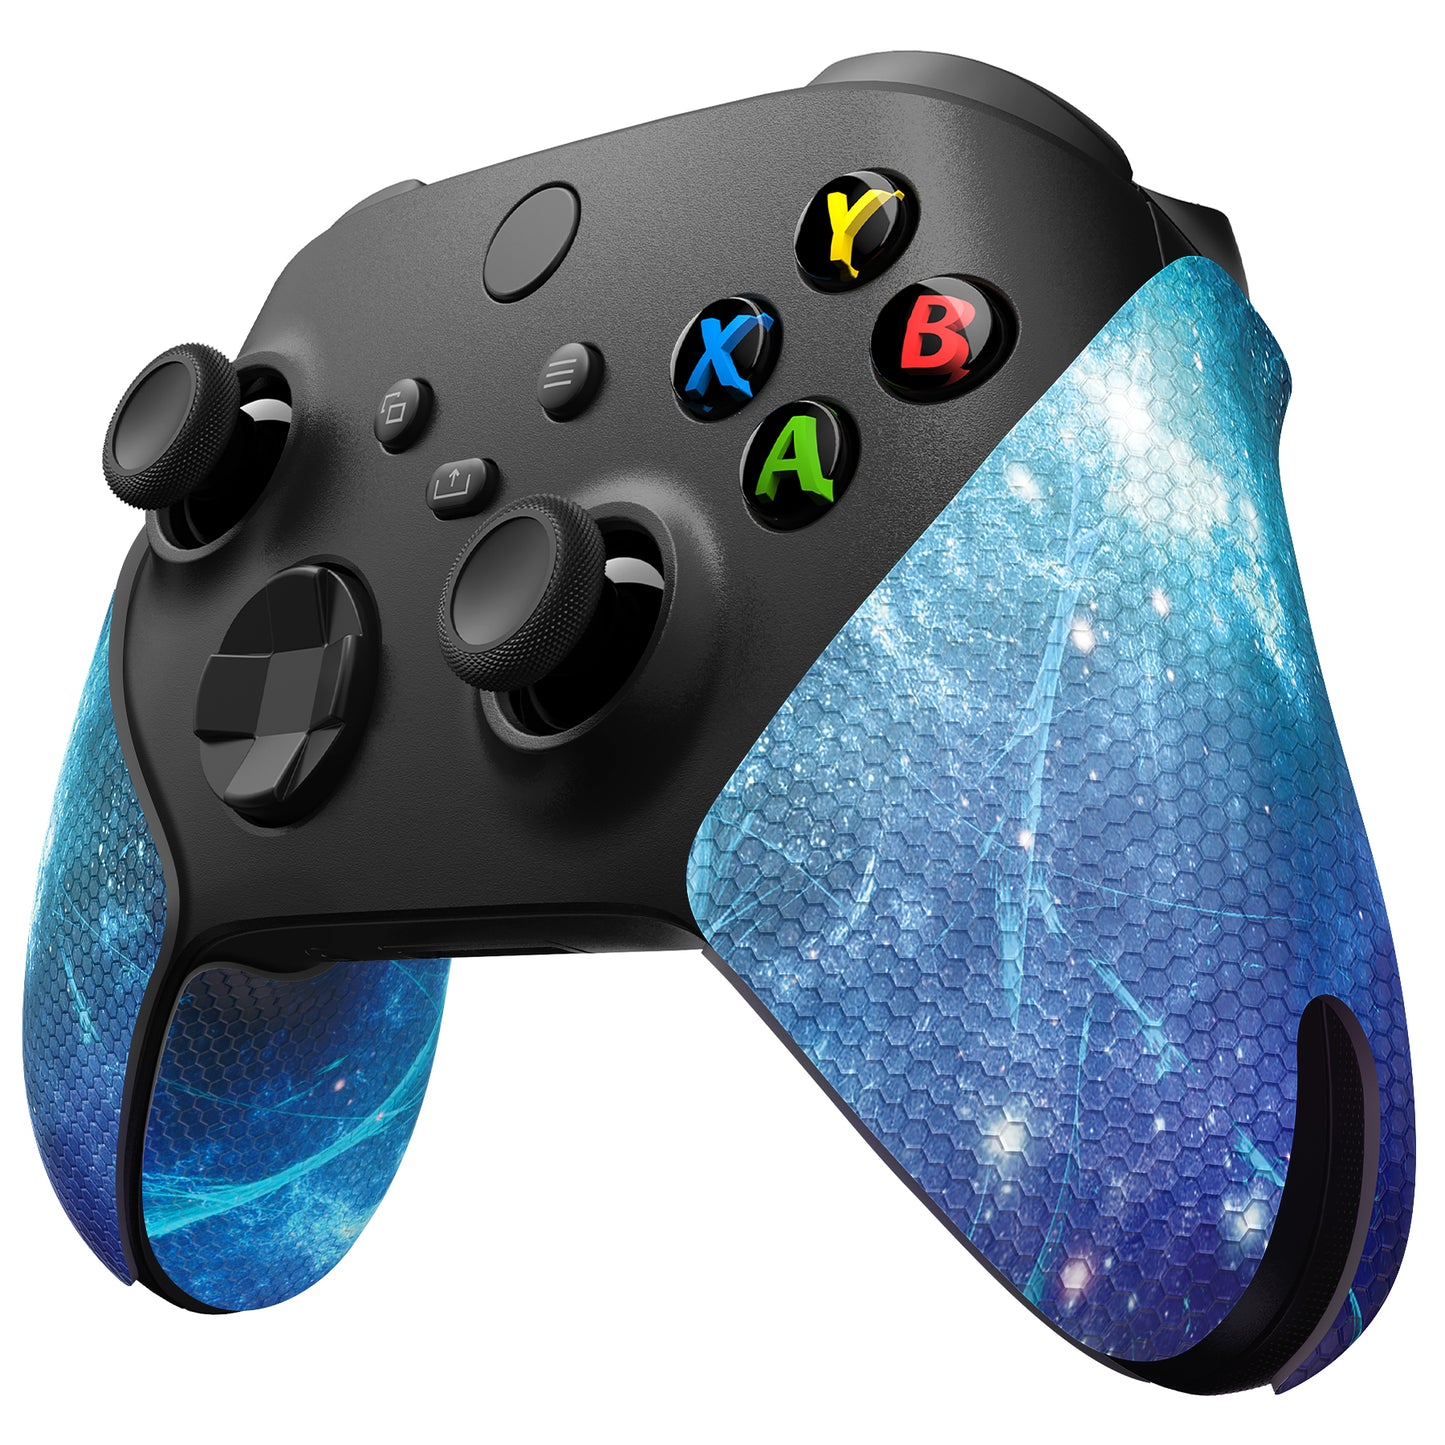 PlayVital Blue Nebula Anti-Skid Sweat-Absorbent Controller Grip for Xbox Series X/S Controller, Professional Textured Soft Rubber Pads Handle Grips for Xbox Series X/S Controller - X3PJ040 PlayVital